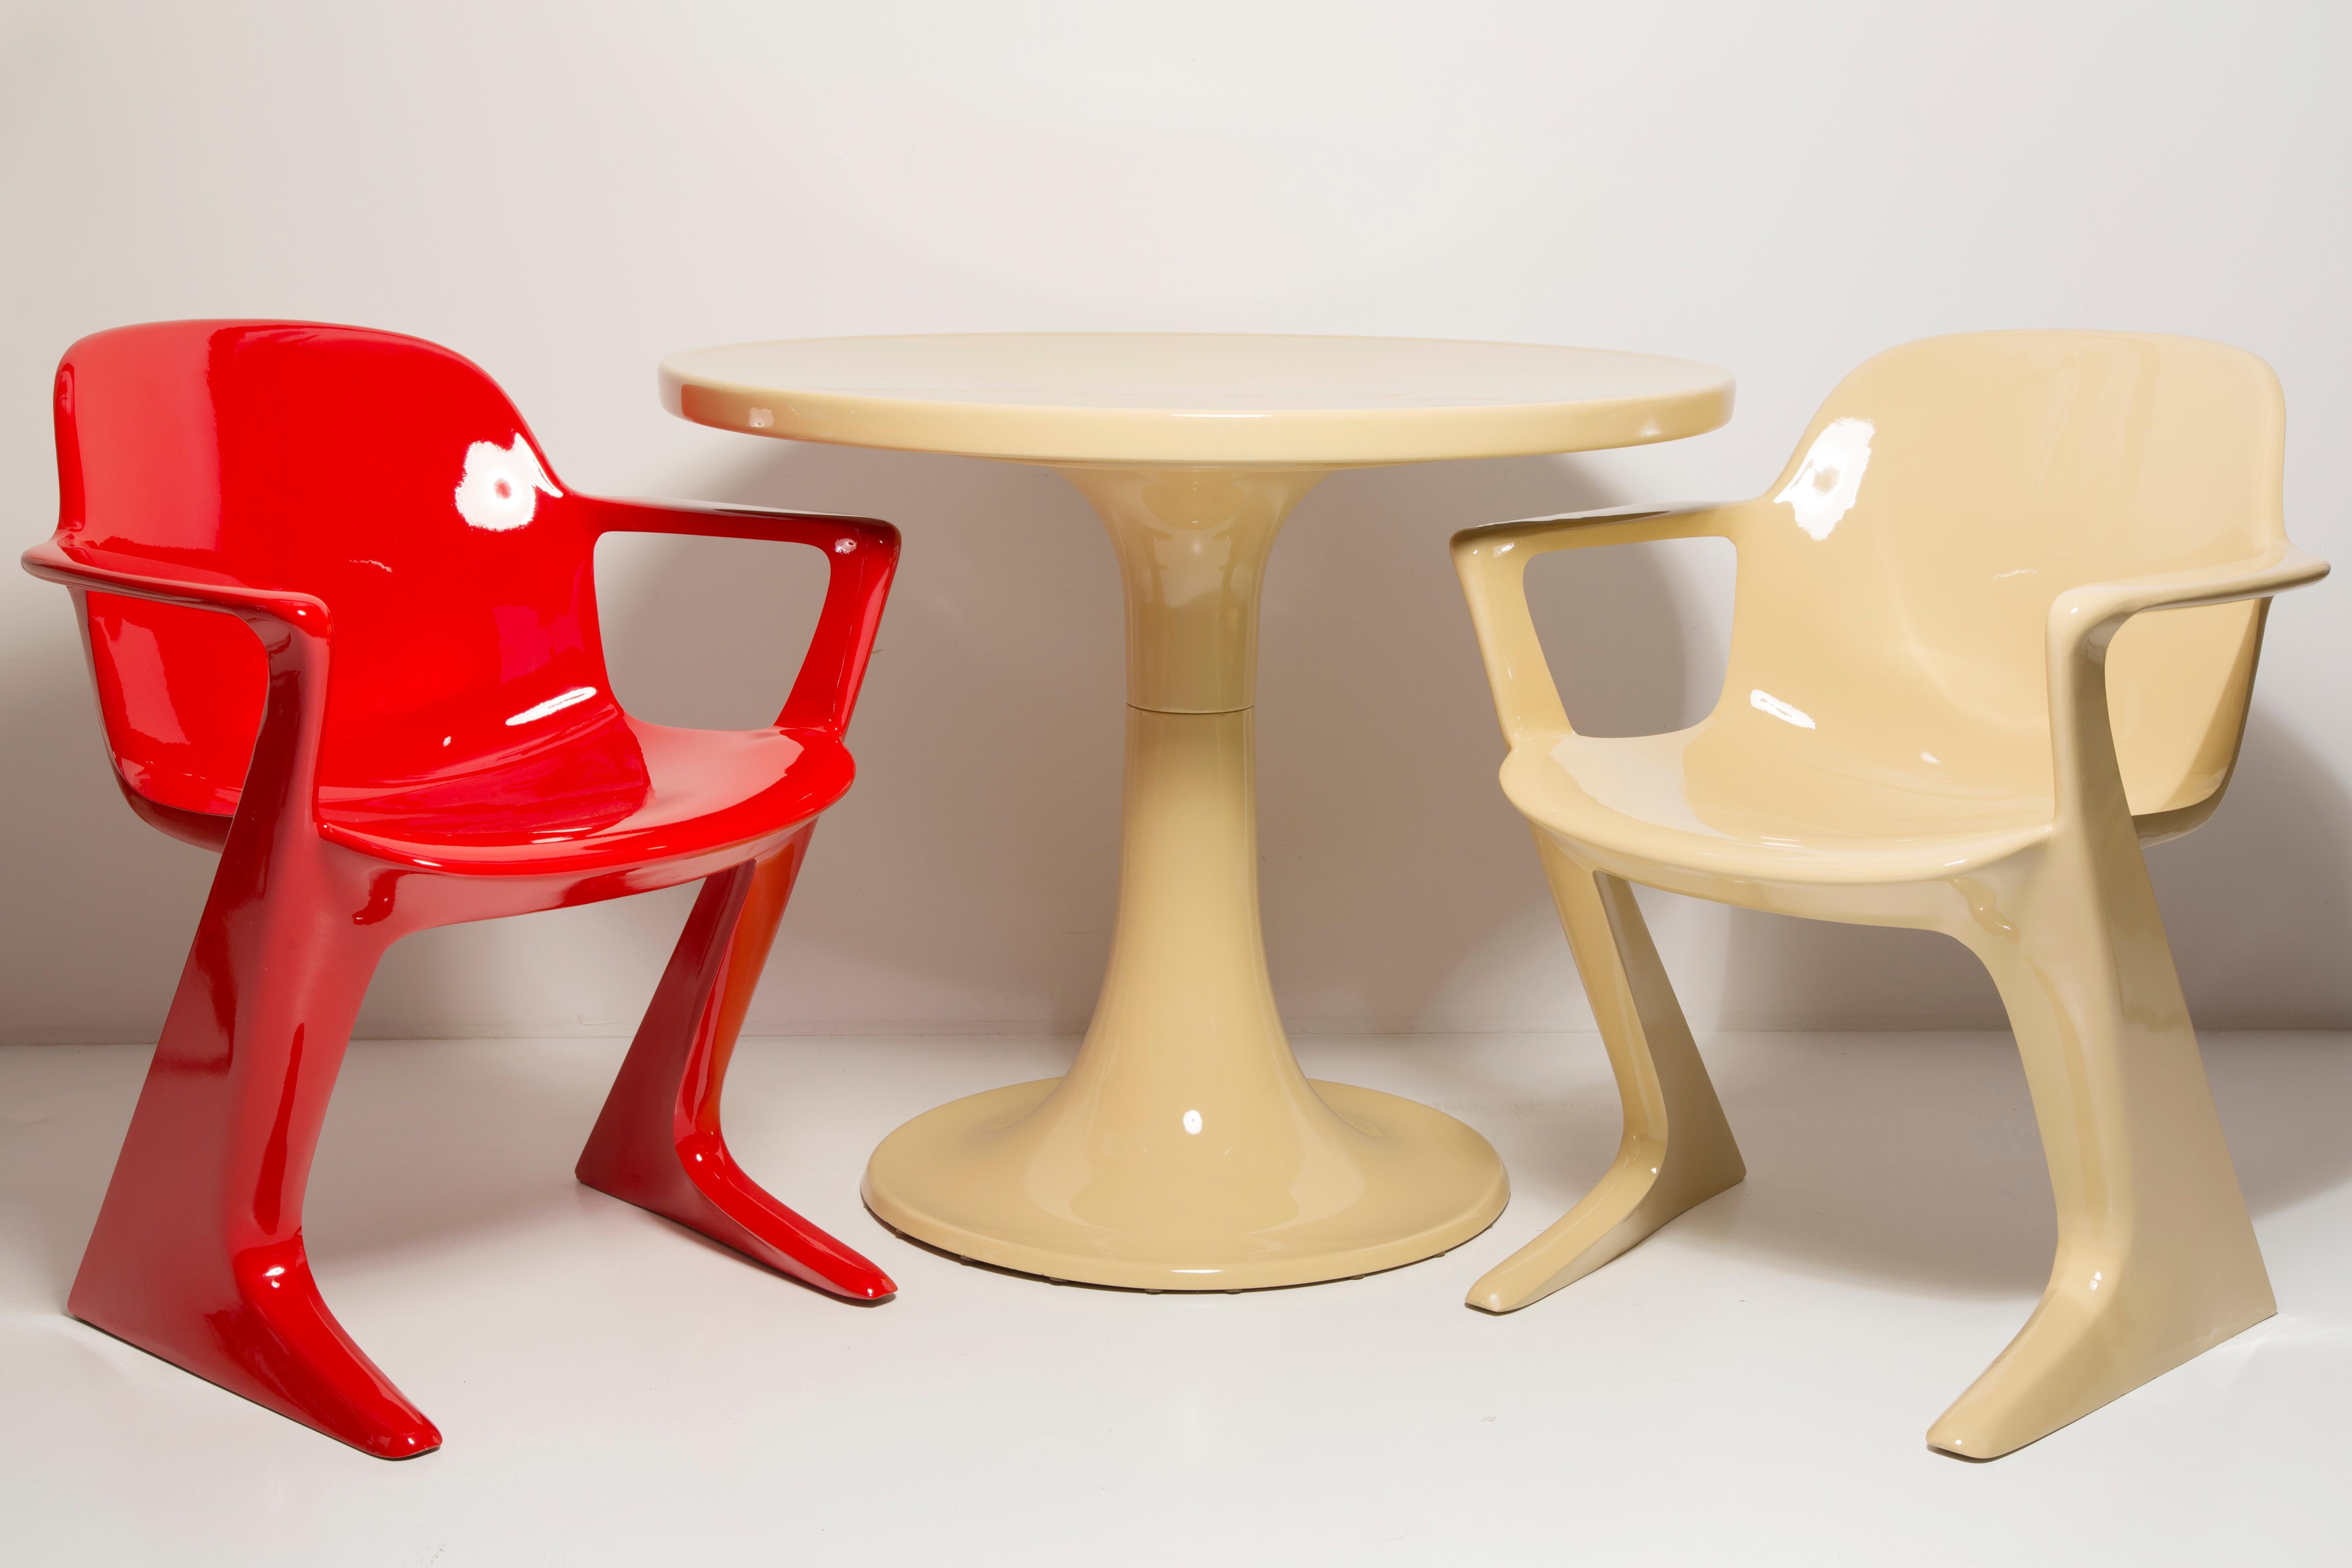 Midcentury Beige and Red Kangaroo Chairs and Table Ernst Moeckl, Germany, 1968 For Sale 2